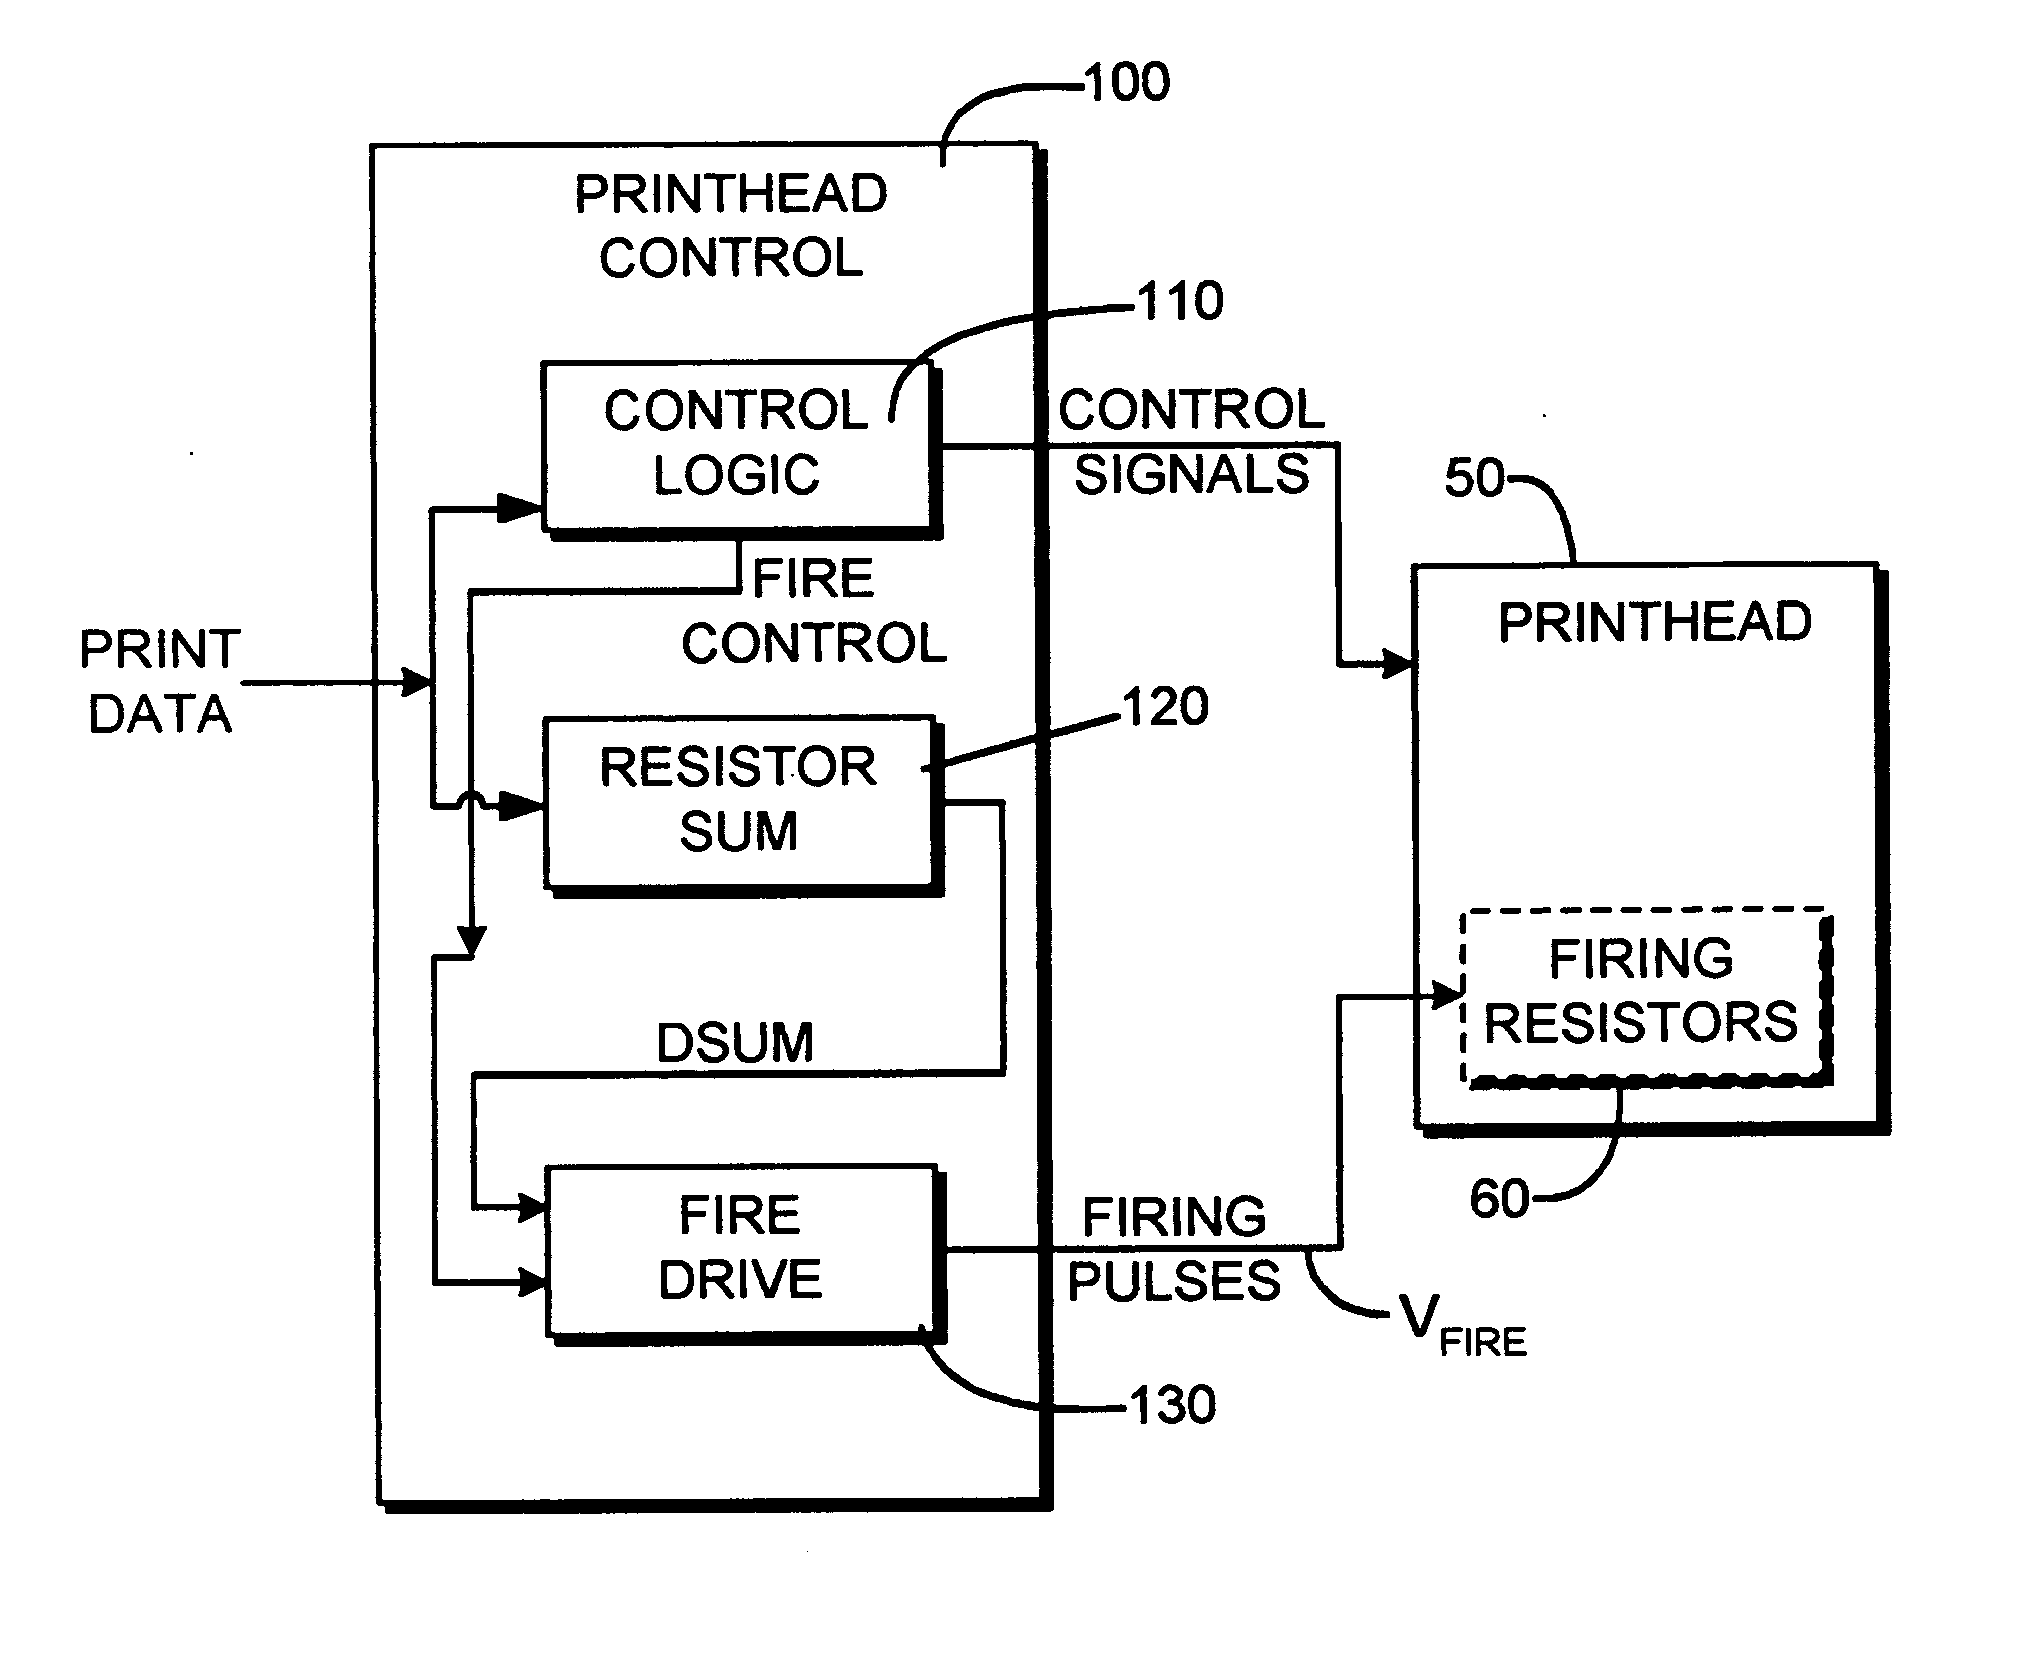 Variable drive for printhead